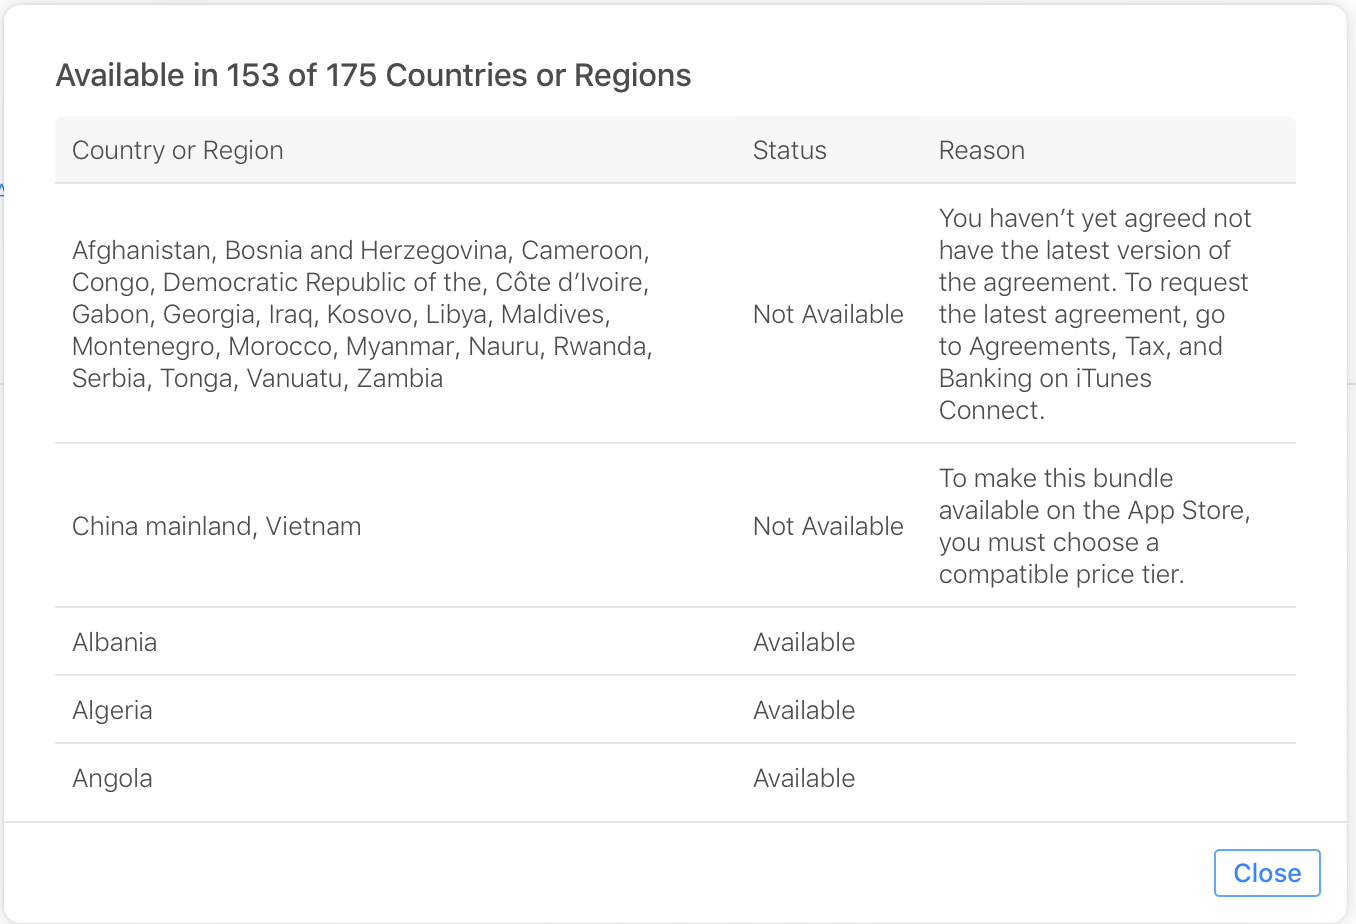 Available in 153 of 175 Countries or Regions dialog